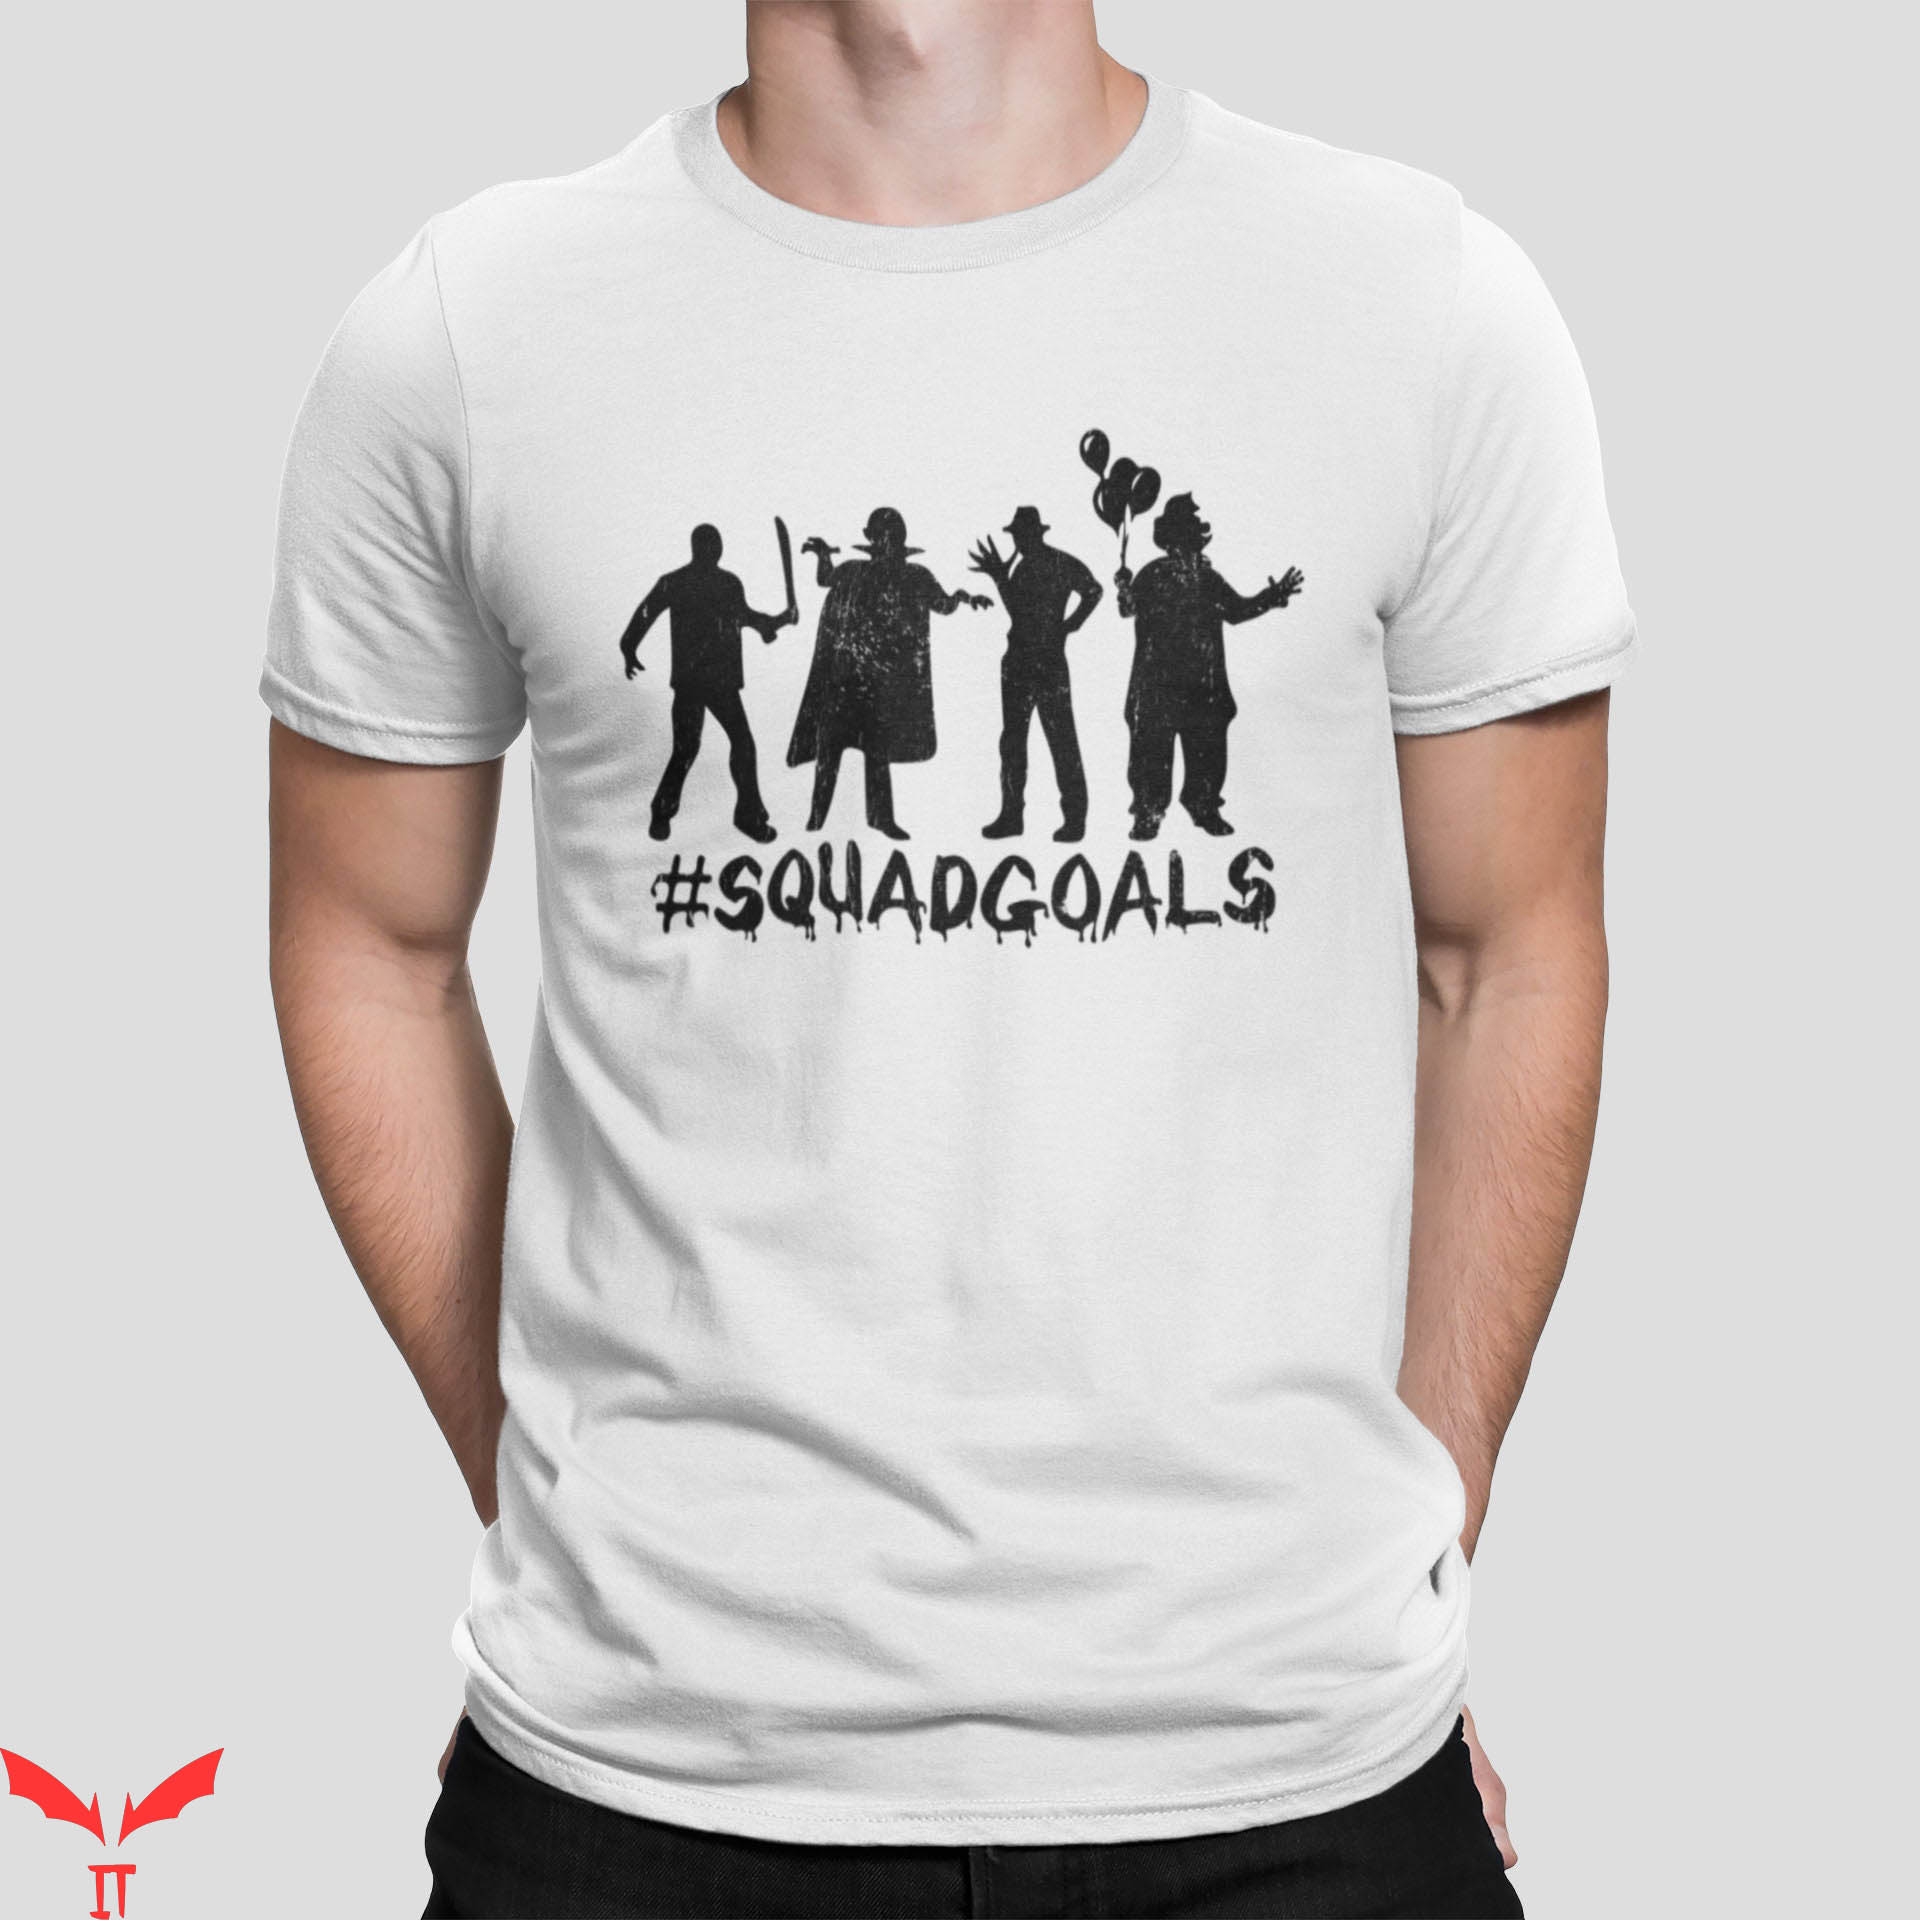 IT Pennywise T-Shirt Squad Goals Silhouette Horror Movie